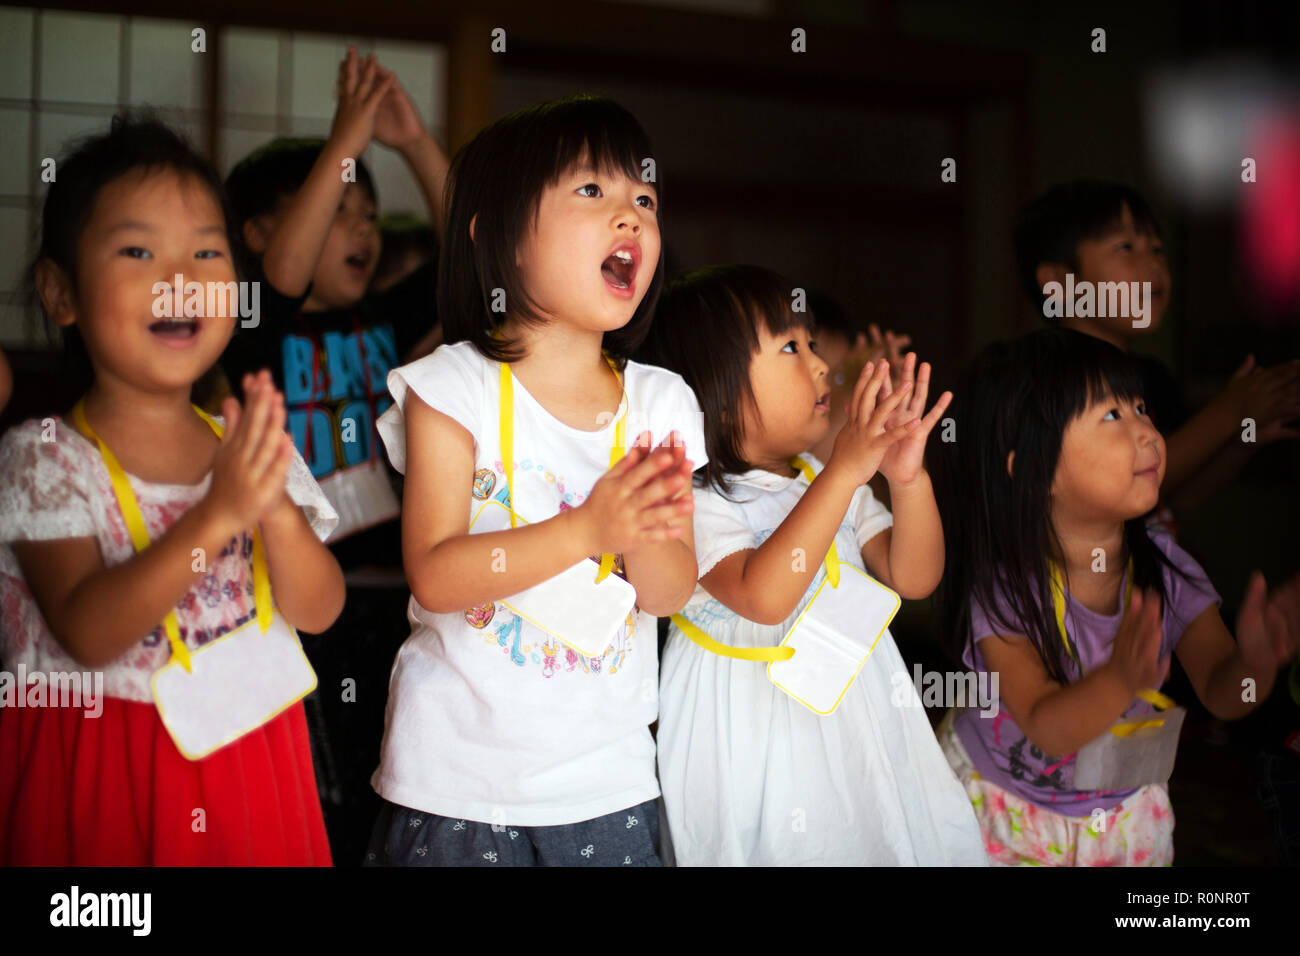 Group of children, girls and boys singing and clapping together in a temple. Stock Photo